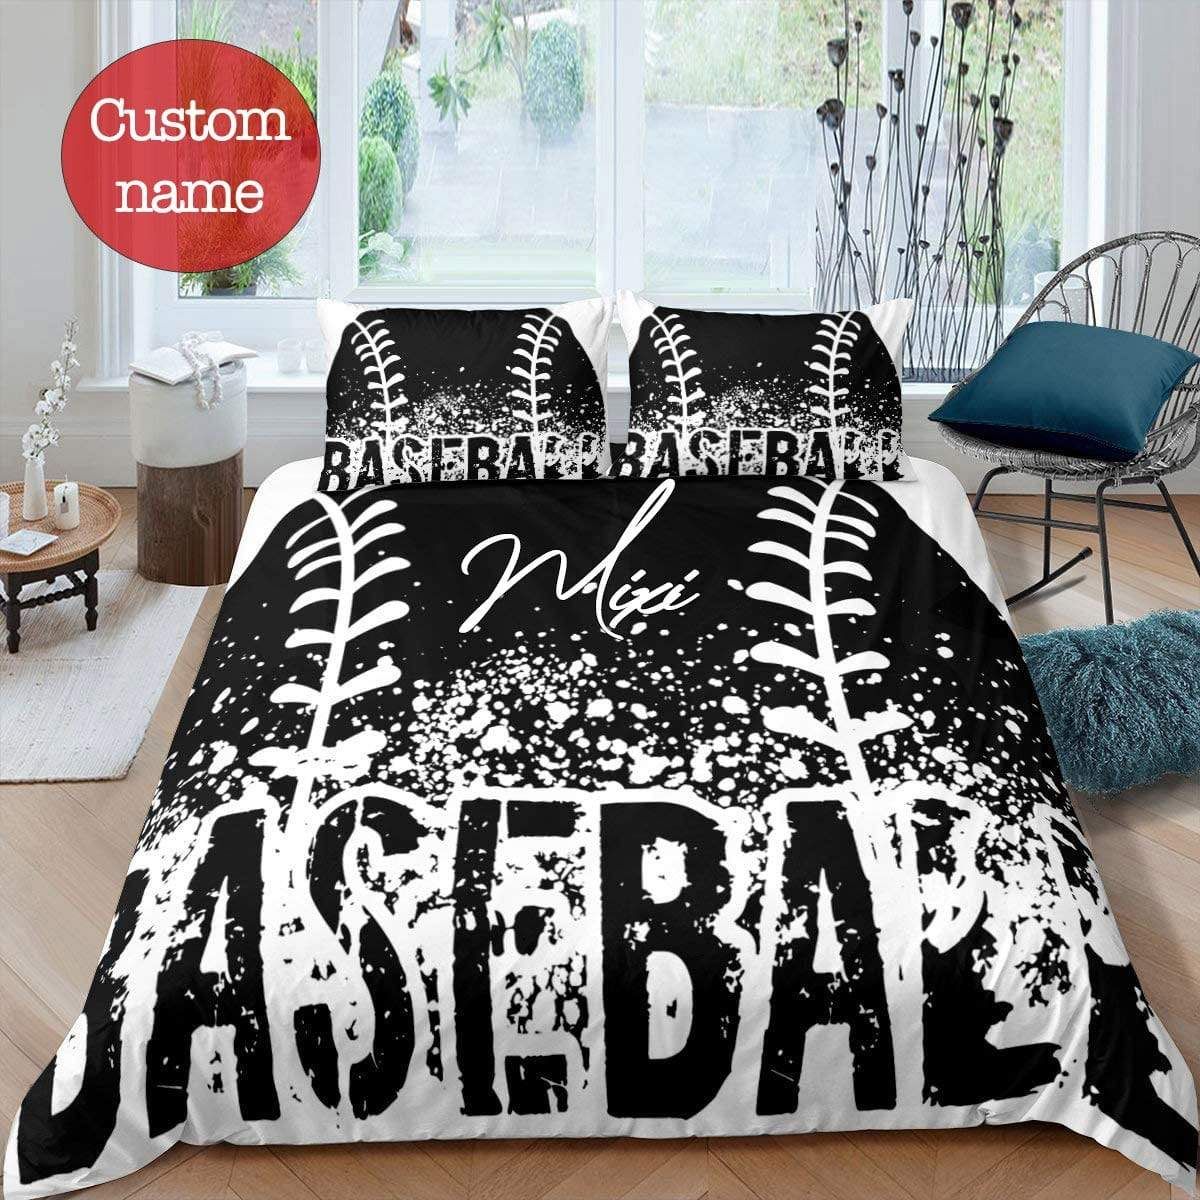 Personalized Baseball Black & White Bedding Set 3D Printing Ball With Your Name